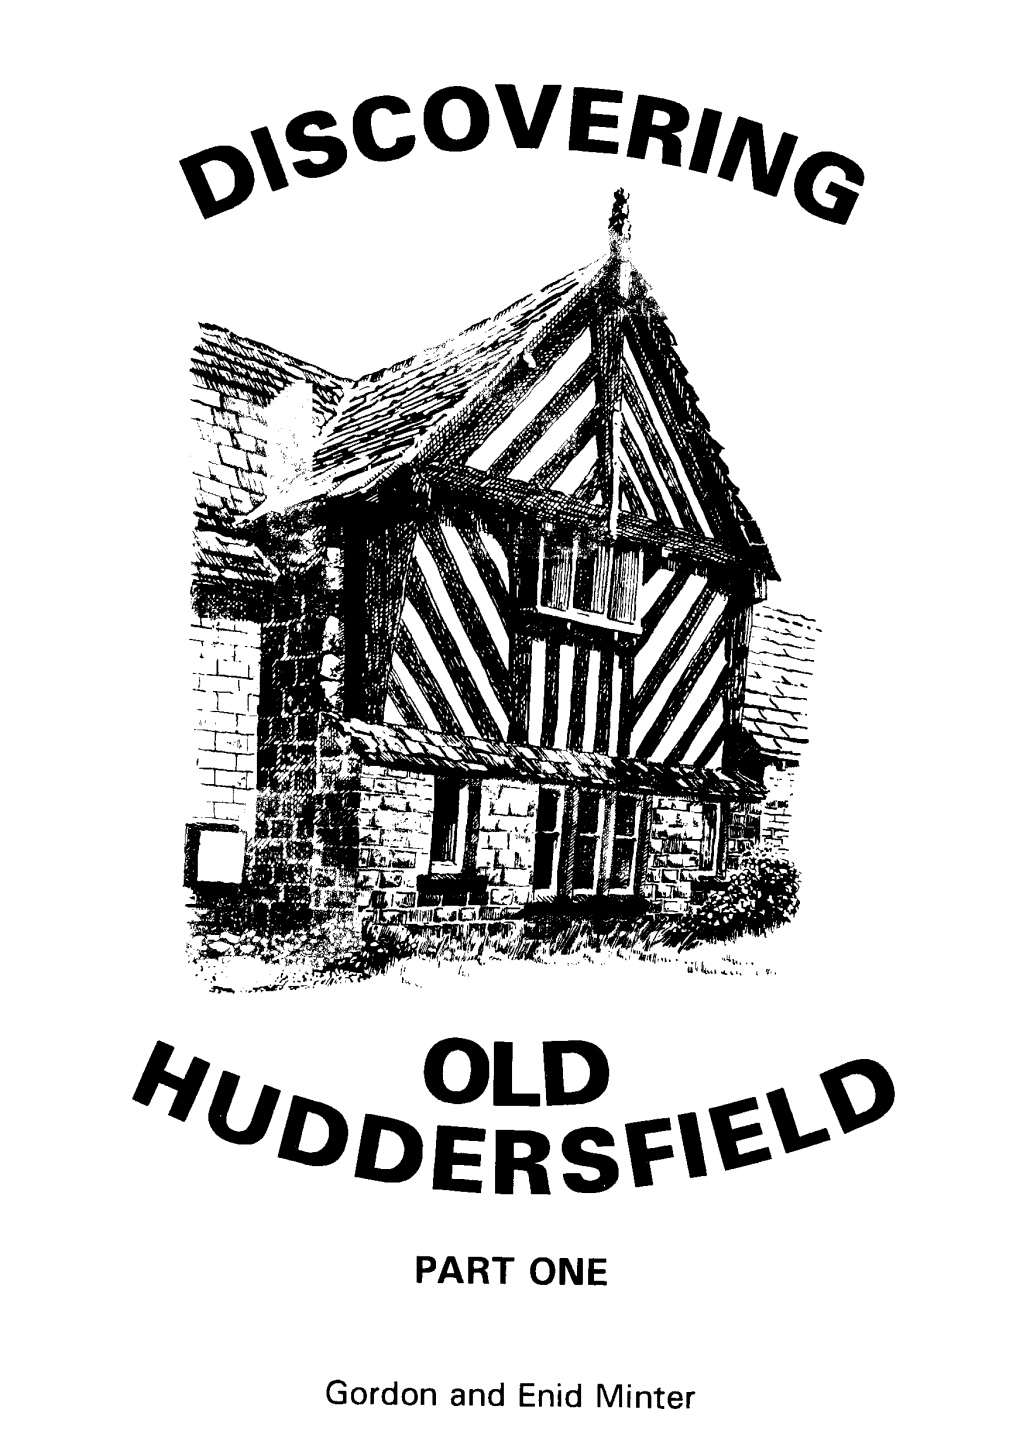 Discovering Old Huddersfield Part One